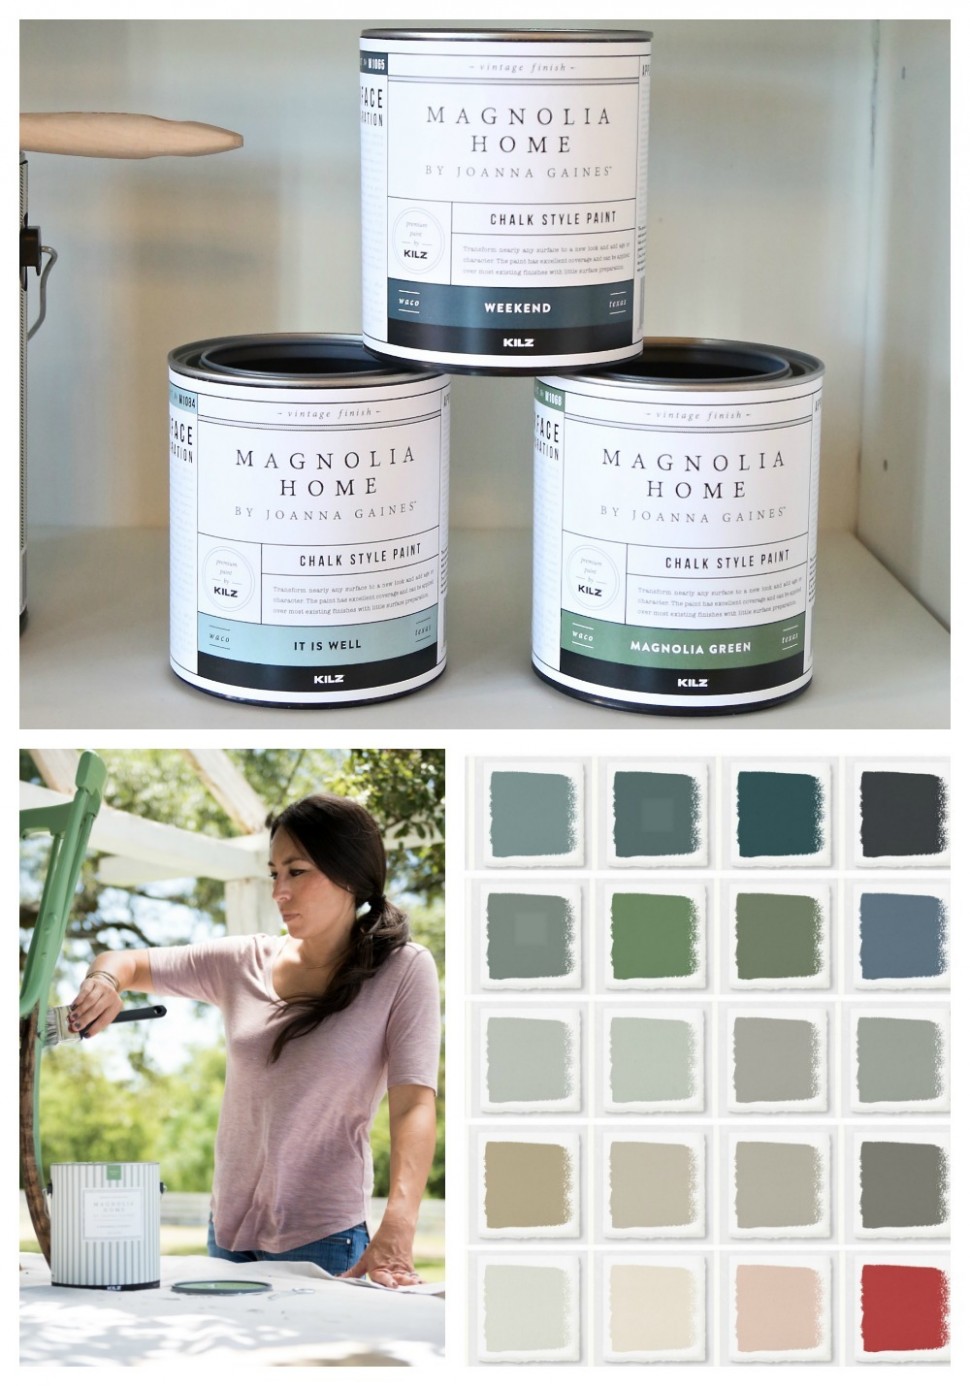 The New Magnolia Home Paint Line You Have To Try | Better Homes ..